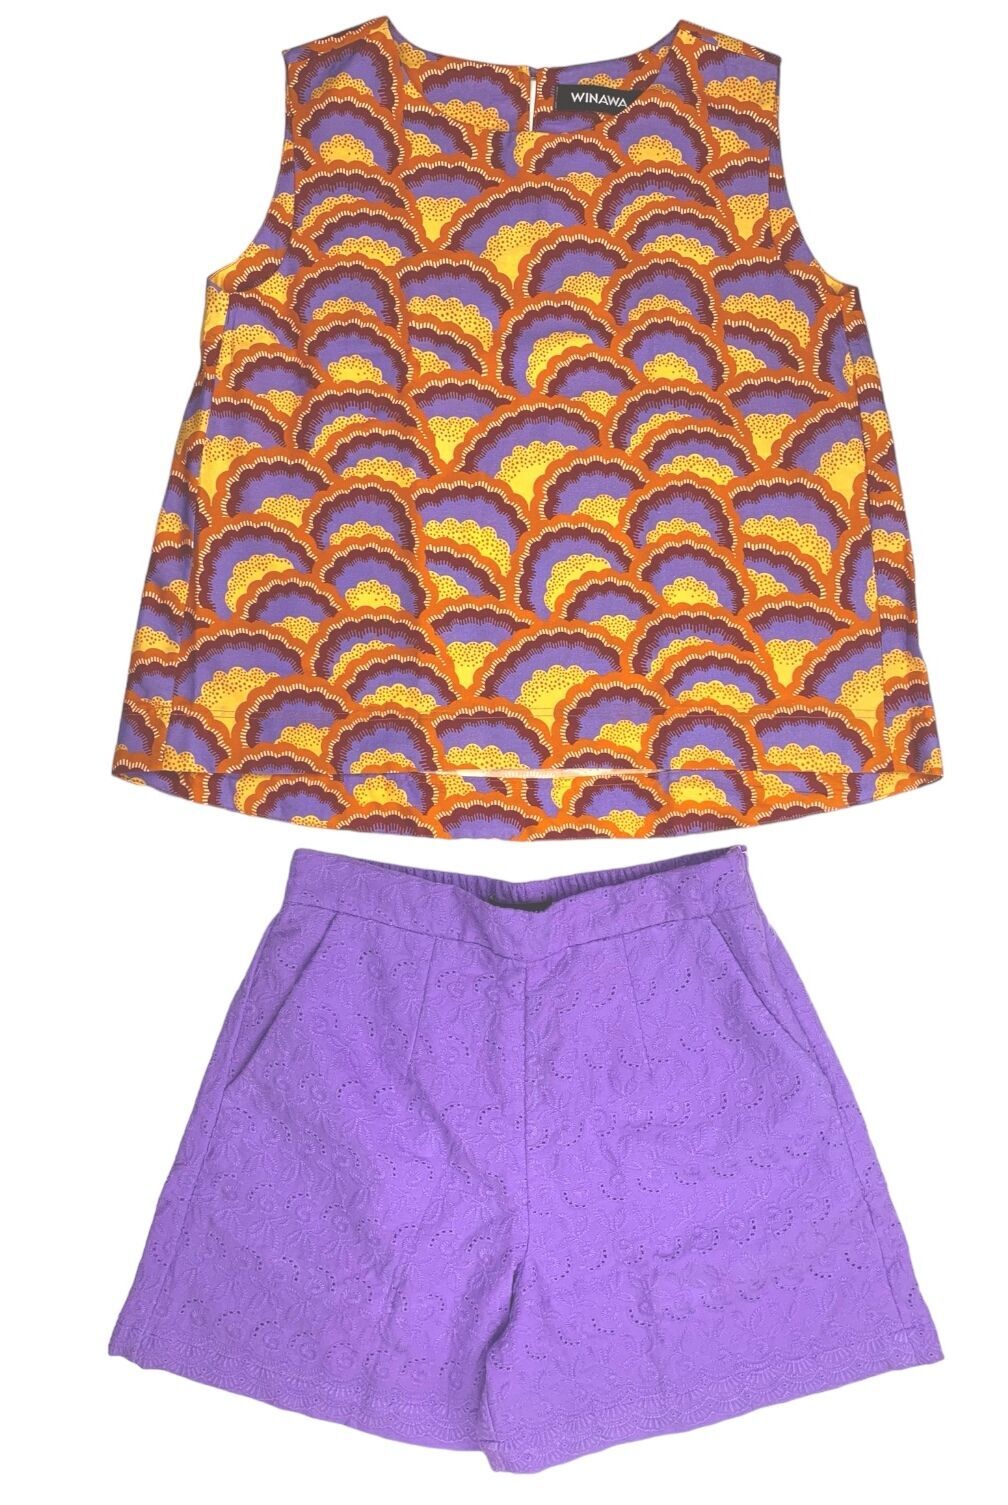 AFRICAN SLEEVELESS TOP AND SHORTS SET